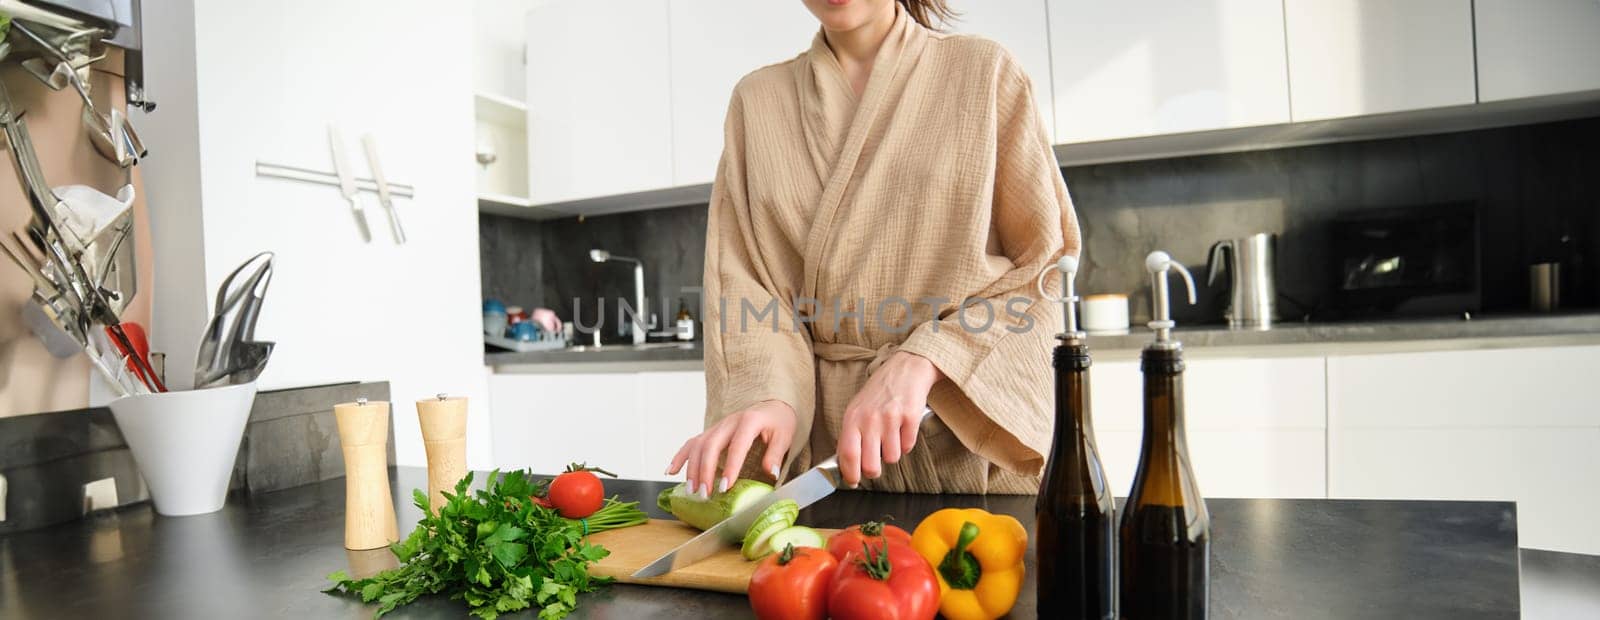 Close up portrait of female hands, woman wearing robe, cutting vegetables on chopping board, cooking vegan dinner, vegetarian meal for family, standing in kitchen.